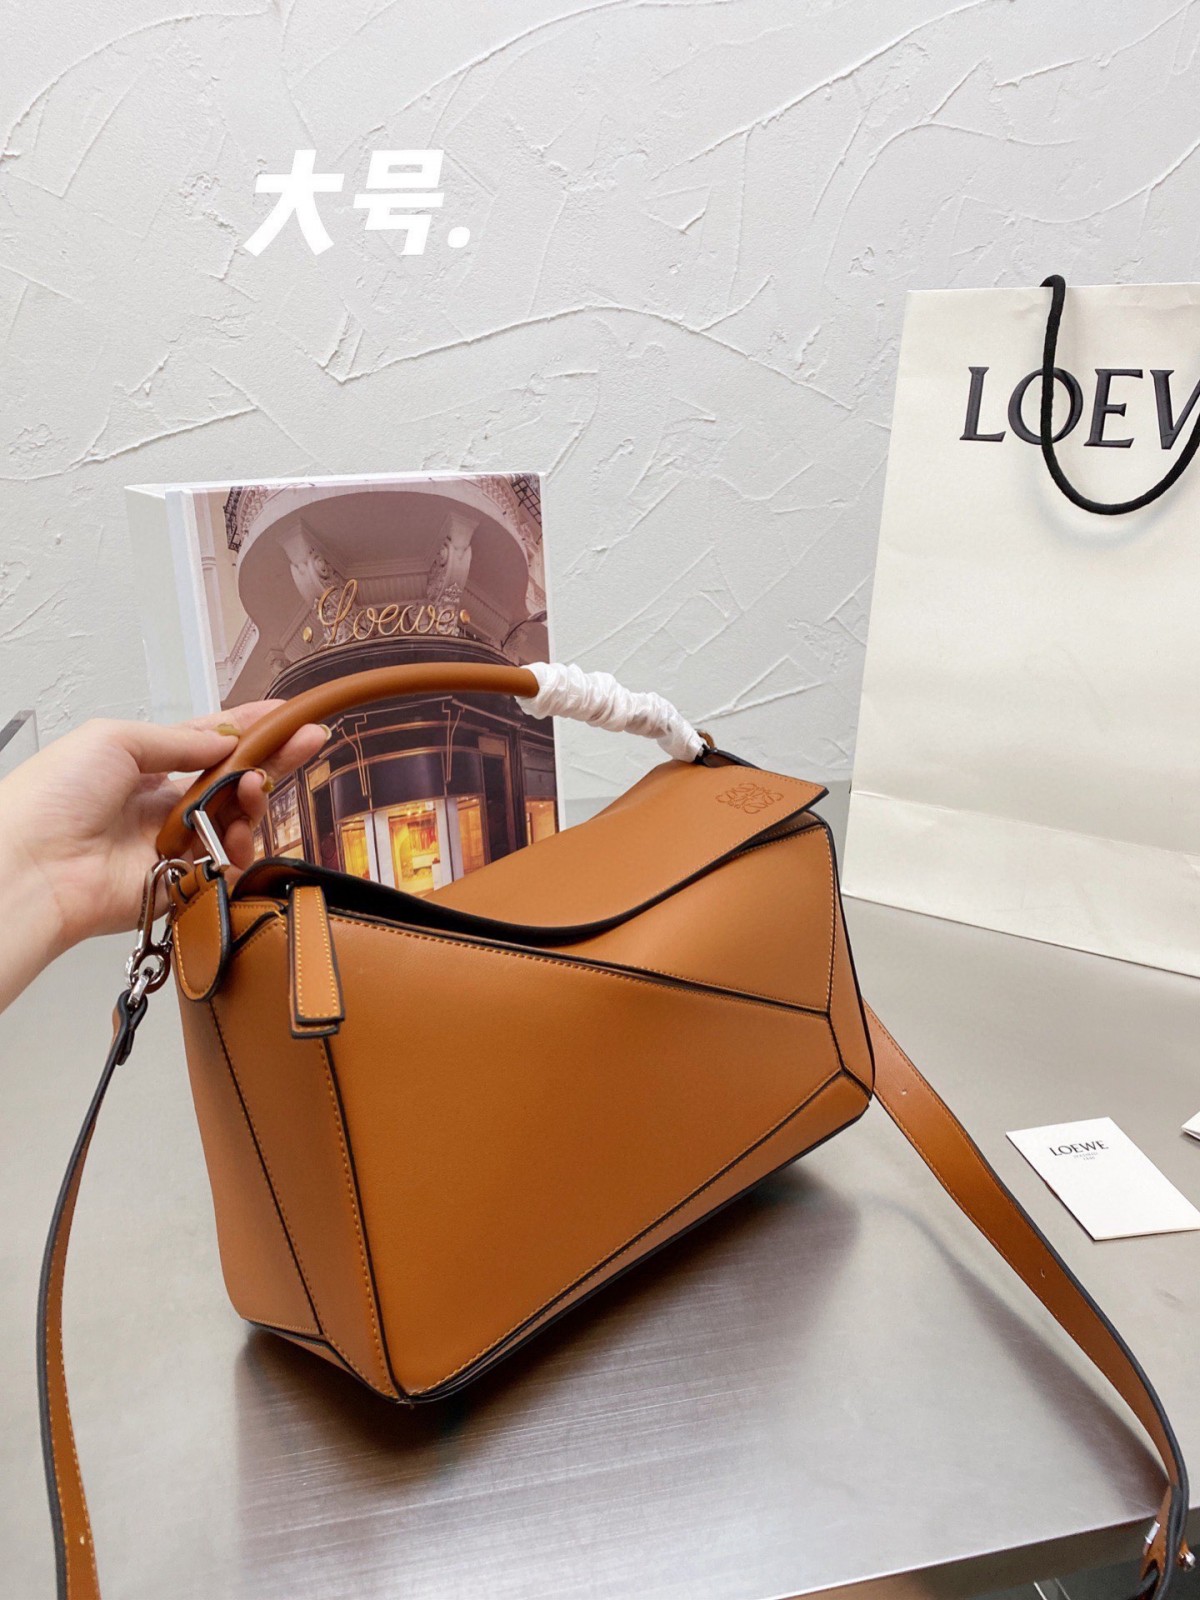 Good quality and cheap Loewe Puzzle replica bags, the price is only $199? (2022 Latest)-Best Quality Fake designer Bag Review, Replica designer bag ru